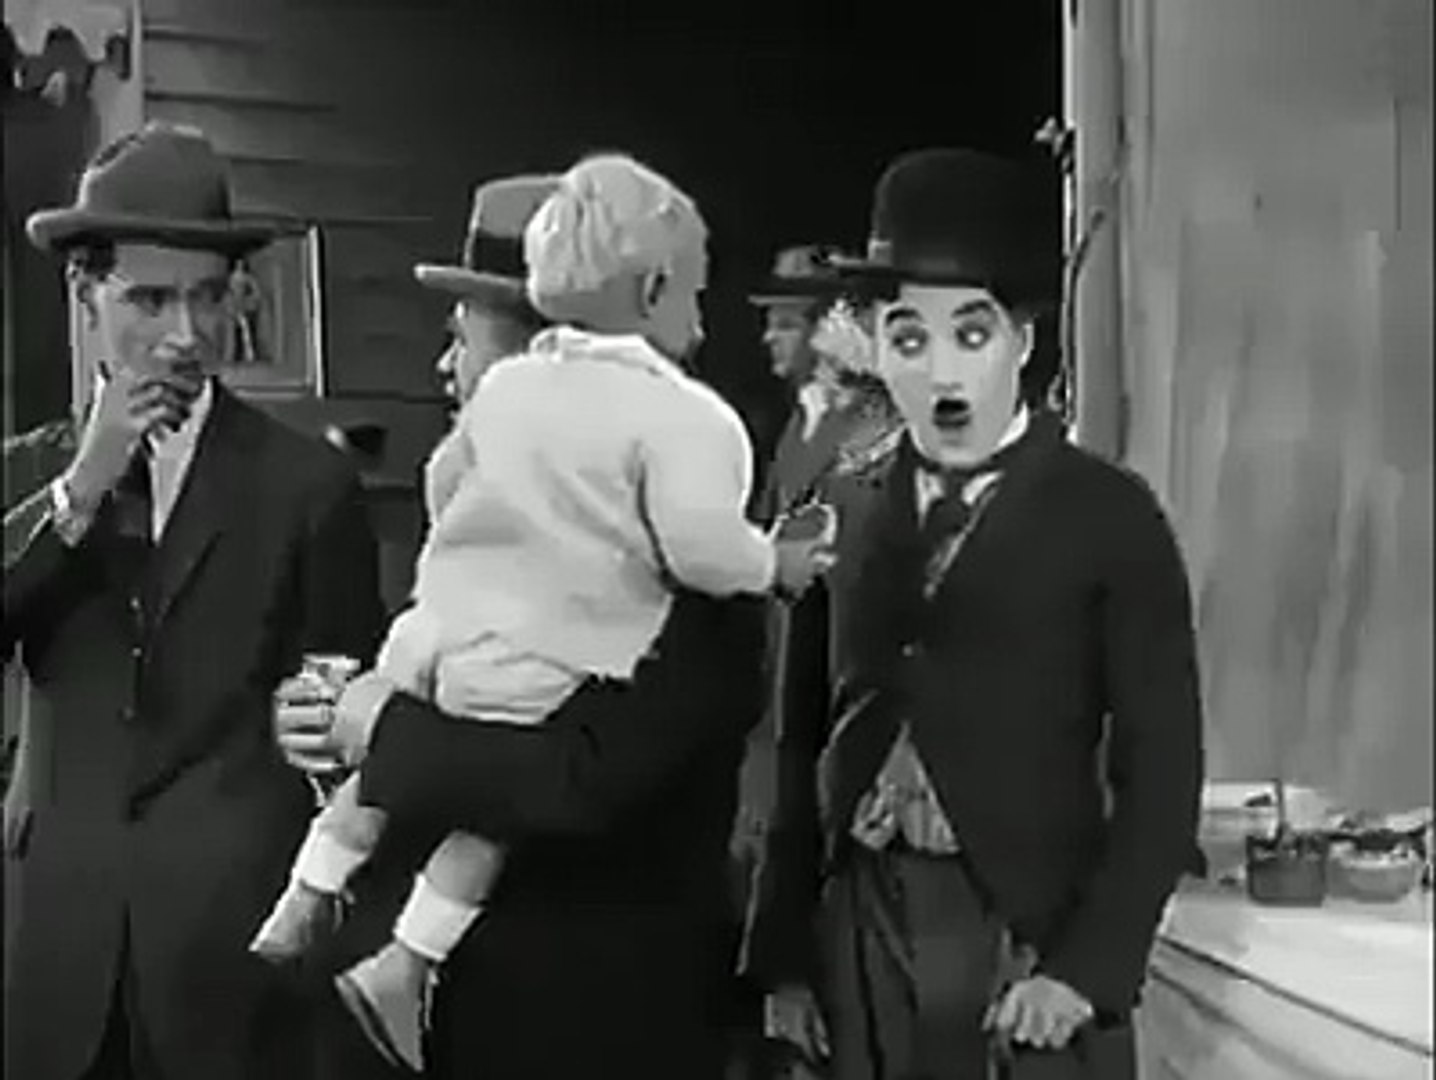 Most Funny videos for Children|Kids most funny videos|Charlie Chaplin  comedy videos - video Dailymotion